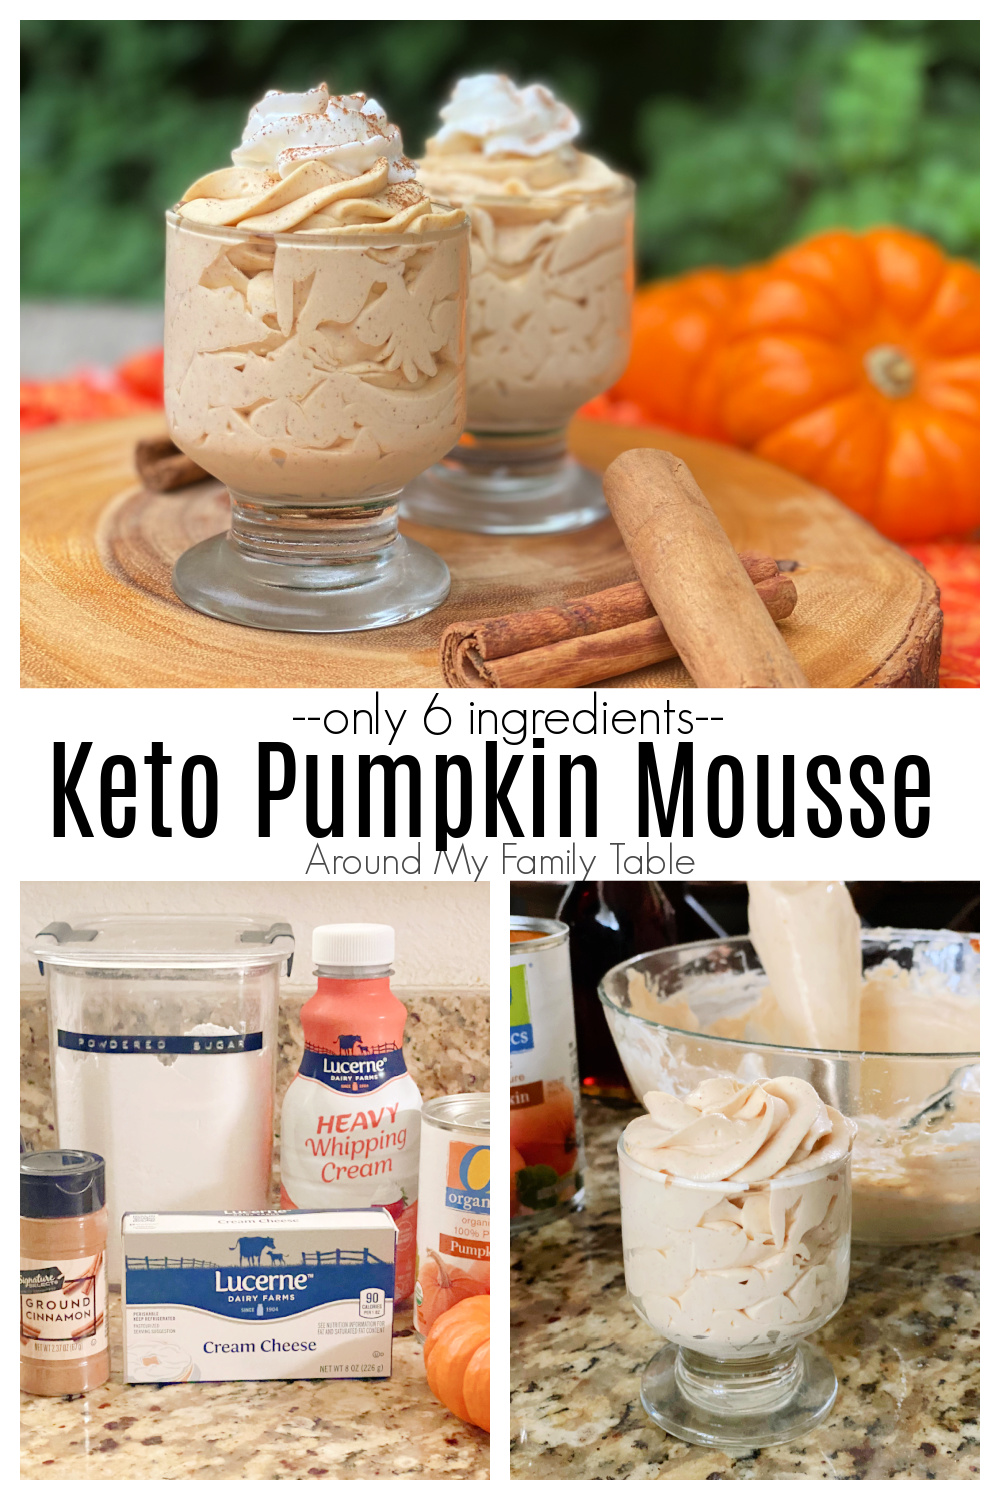 My Keto Pumpkin Mousse has all the fall flavors you are craving. Only 6 ingredients create this light and fluffy fall dessert that you will make all season long. via @slingmama